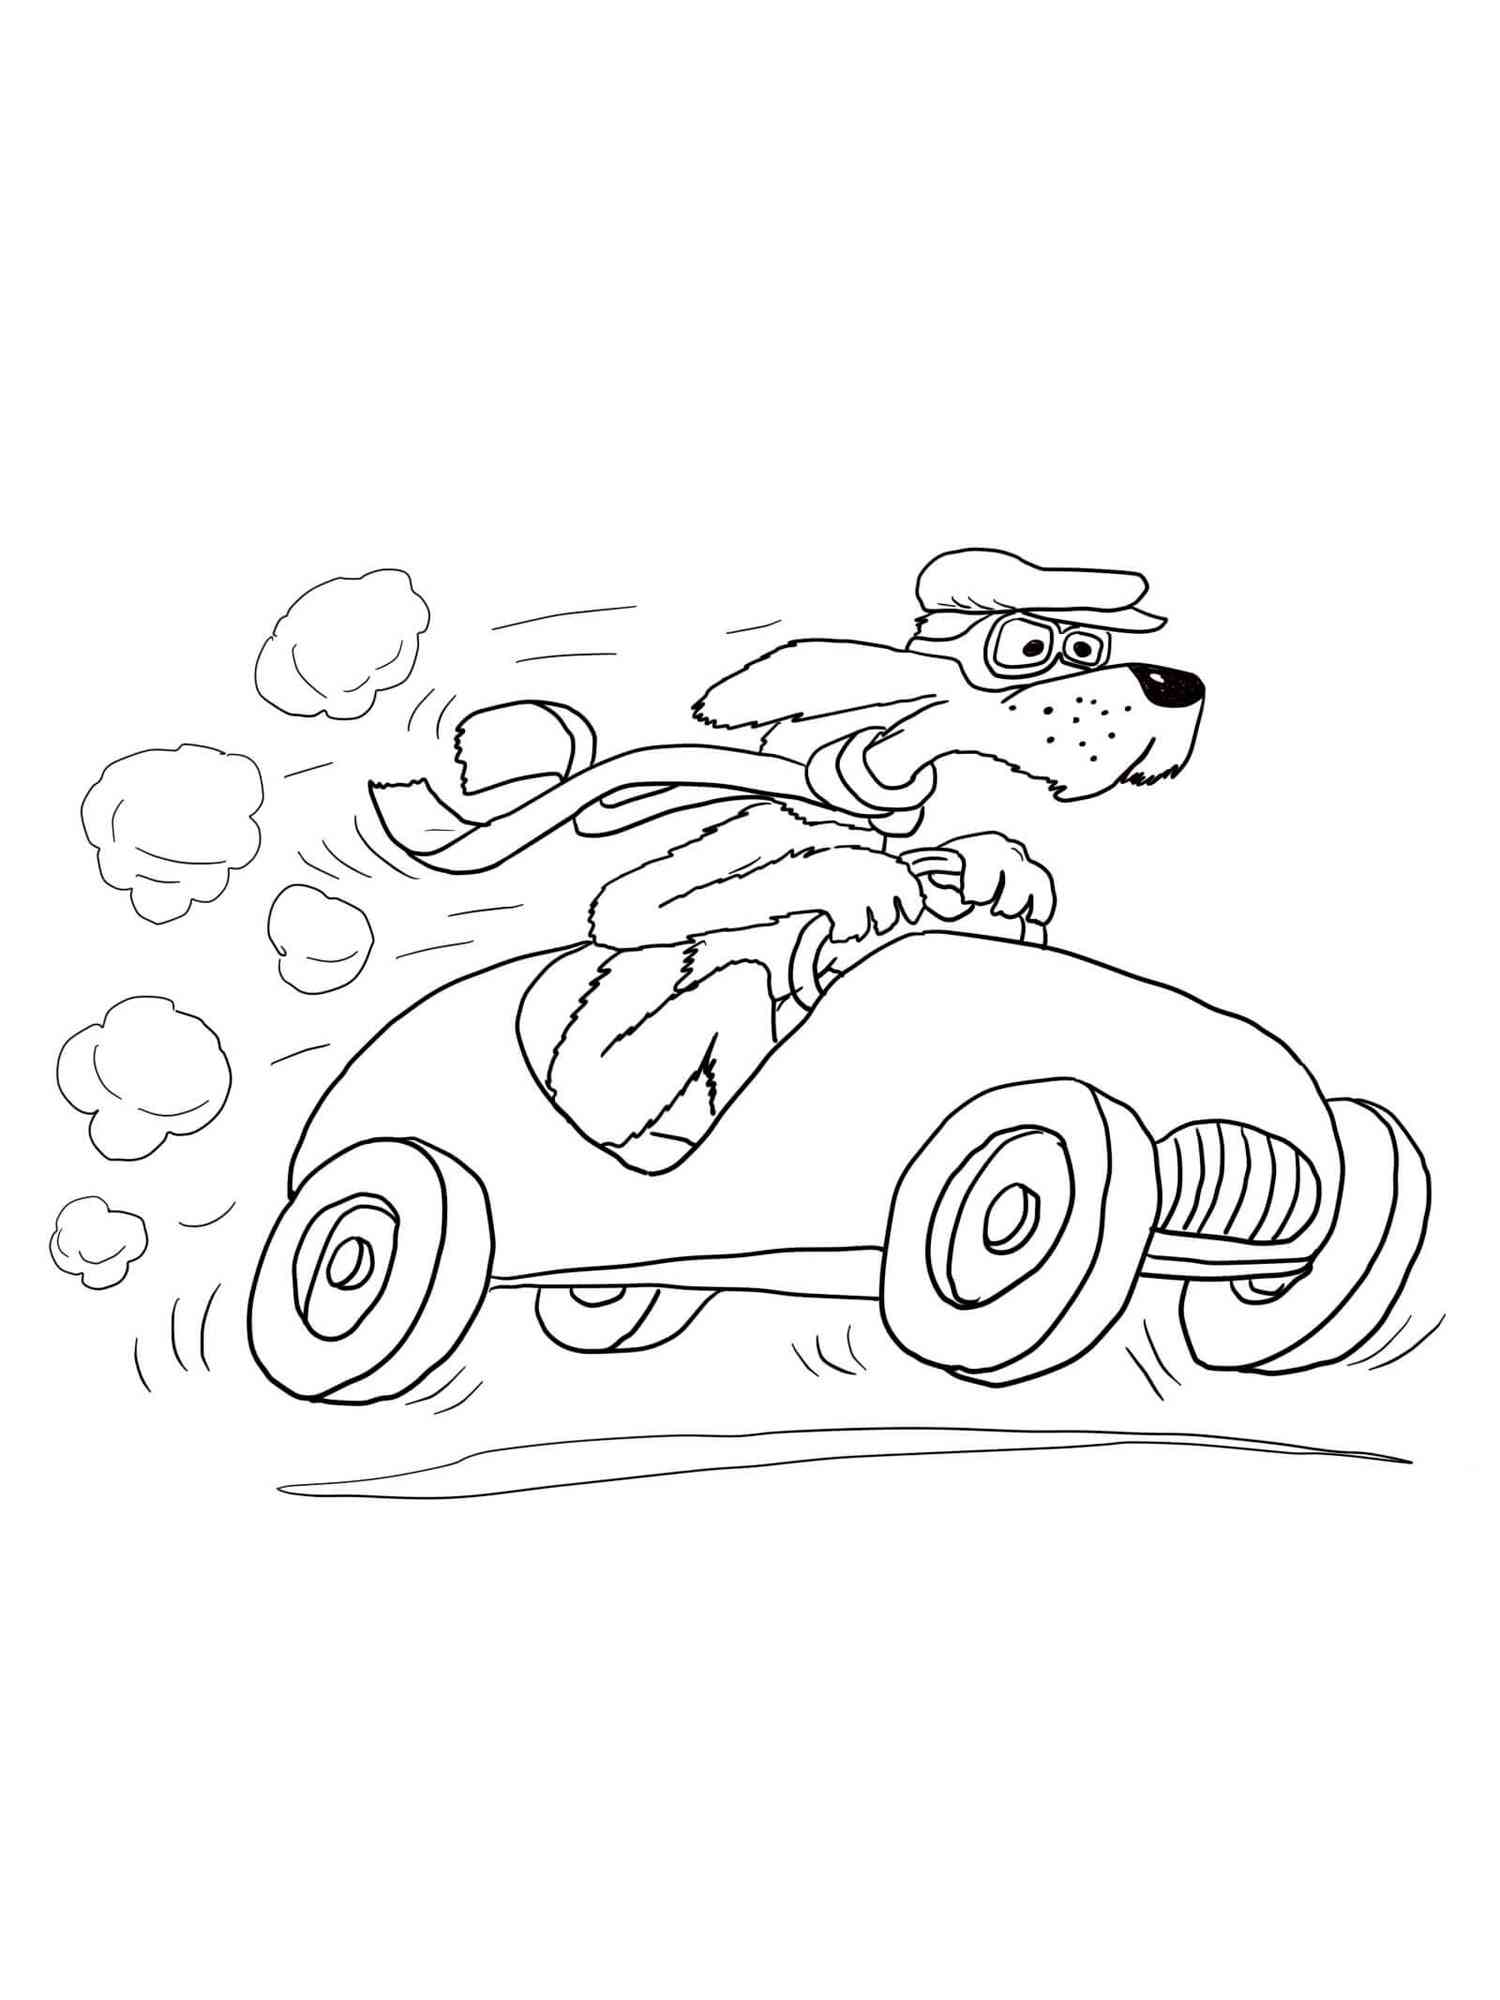 Go, Dog, Go 12 coloring page